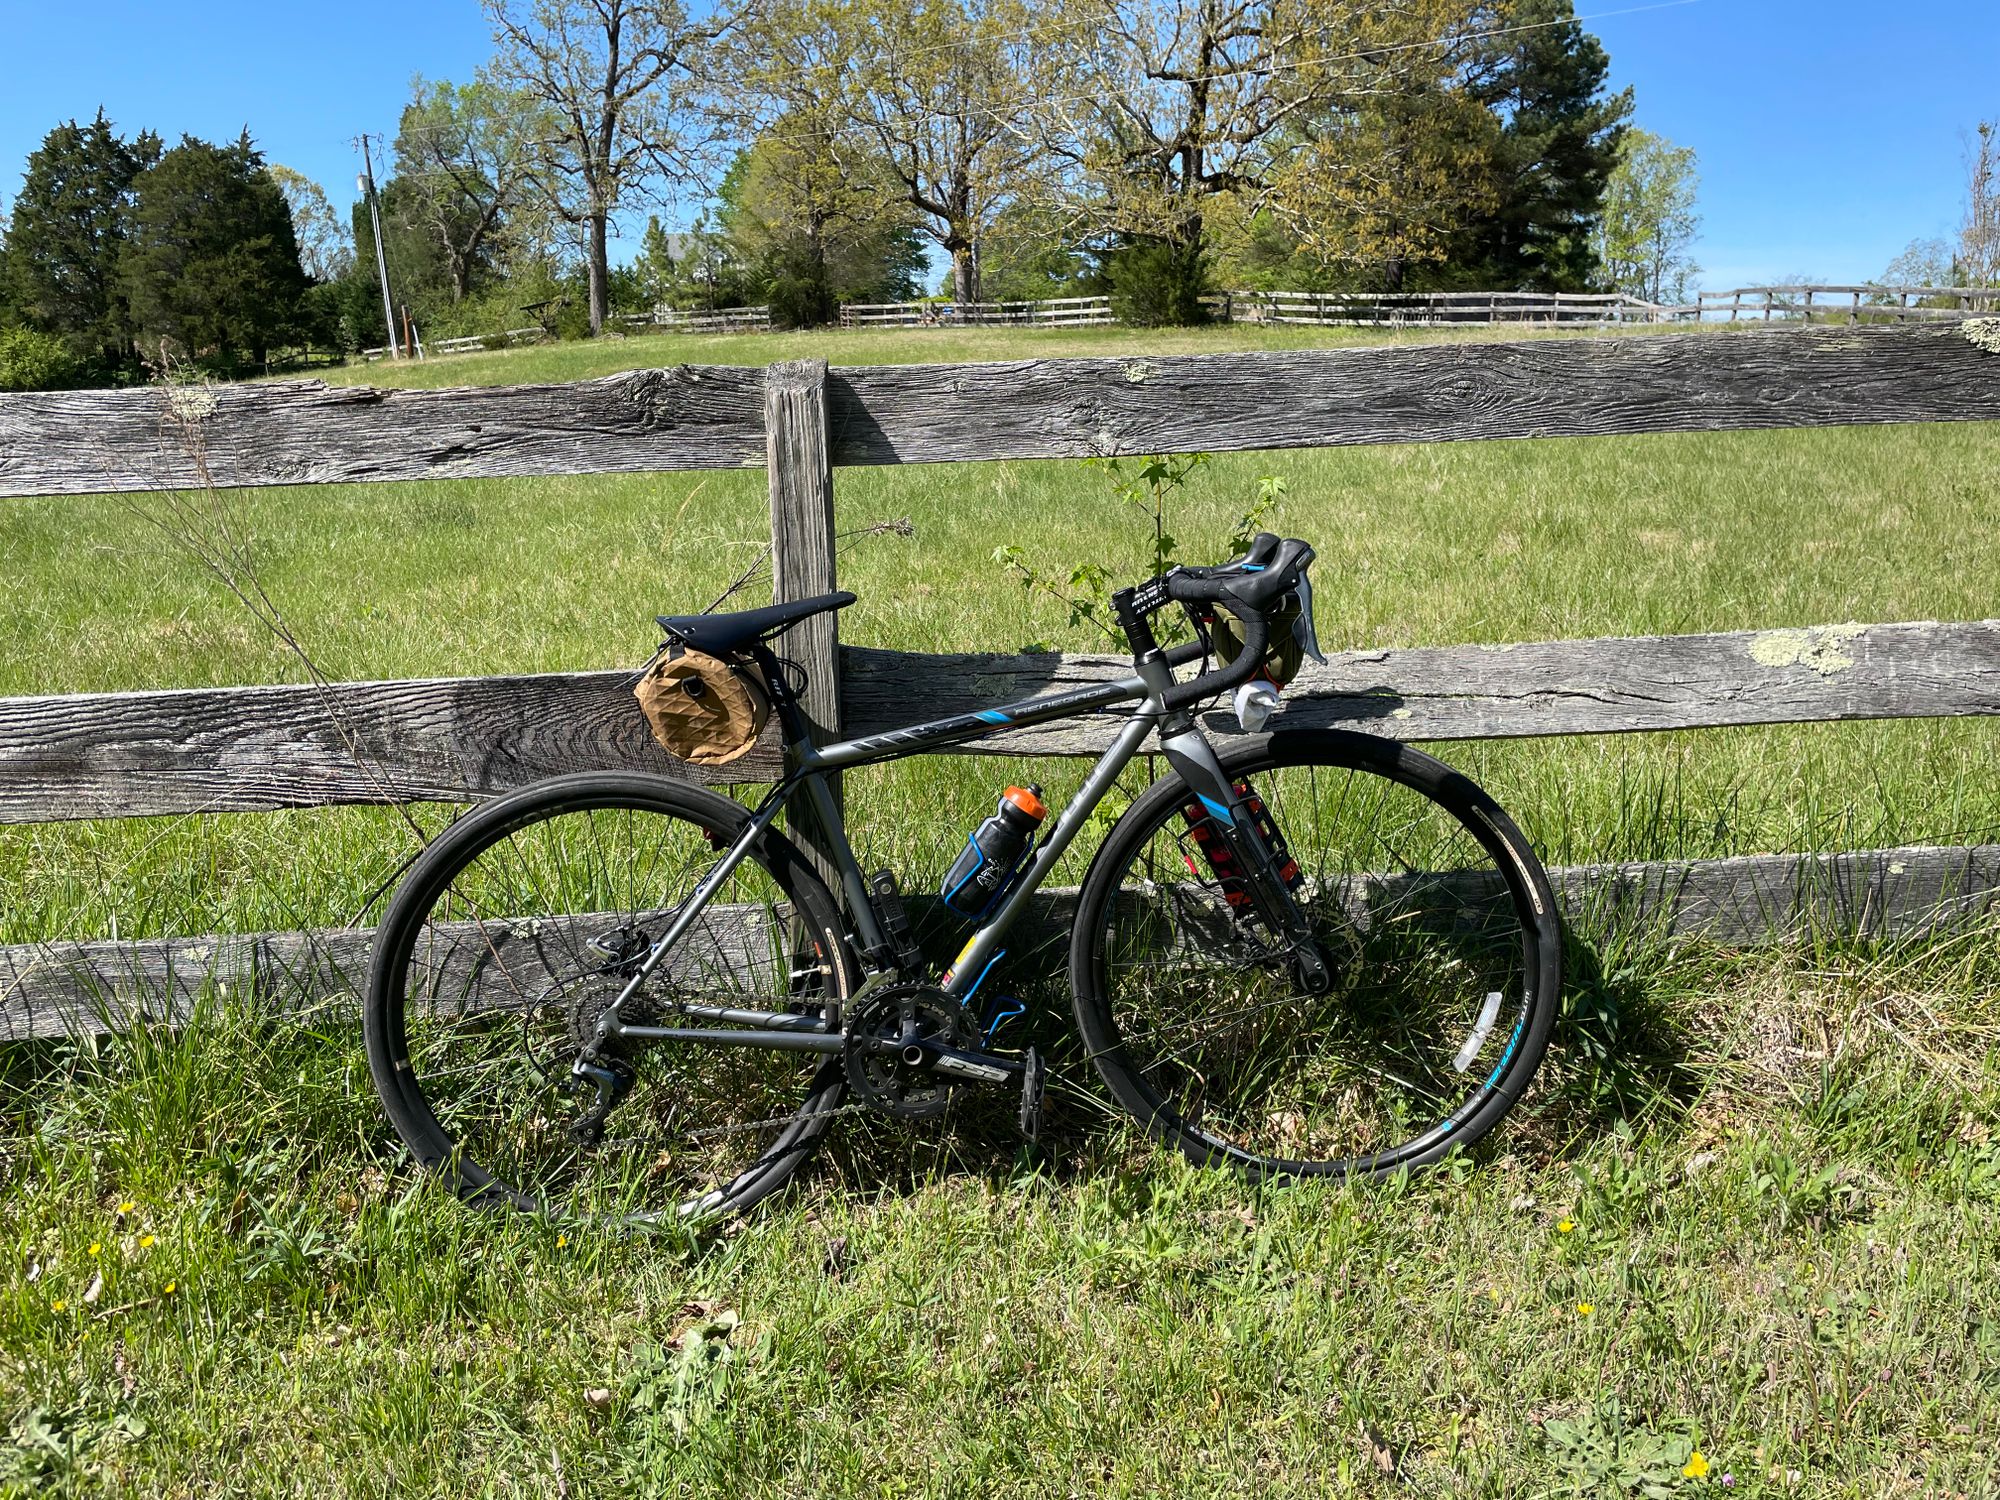 A road bike leans against a wooden fence. It's very green and grassy.